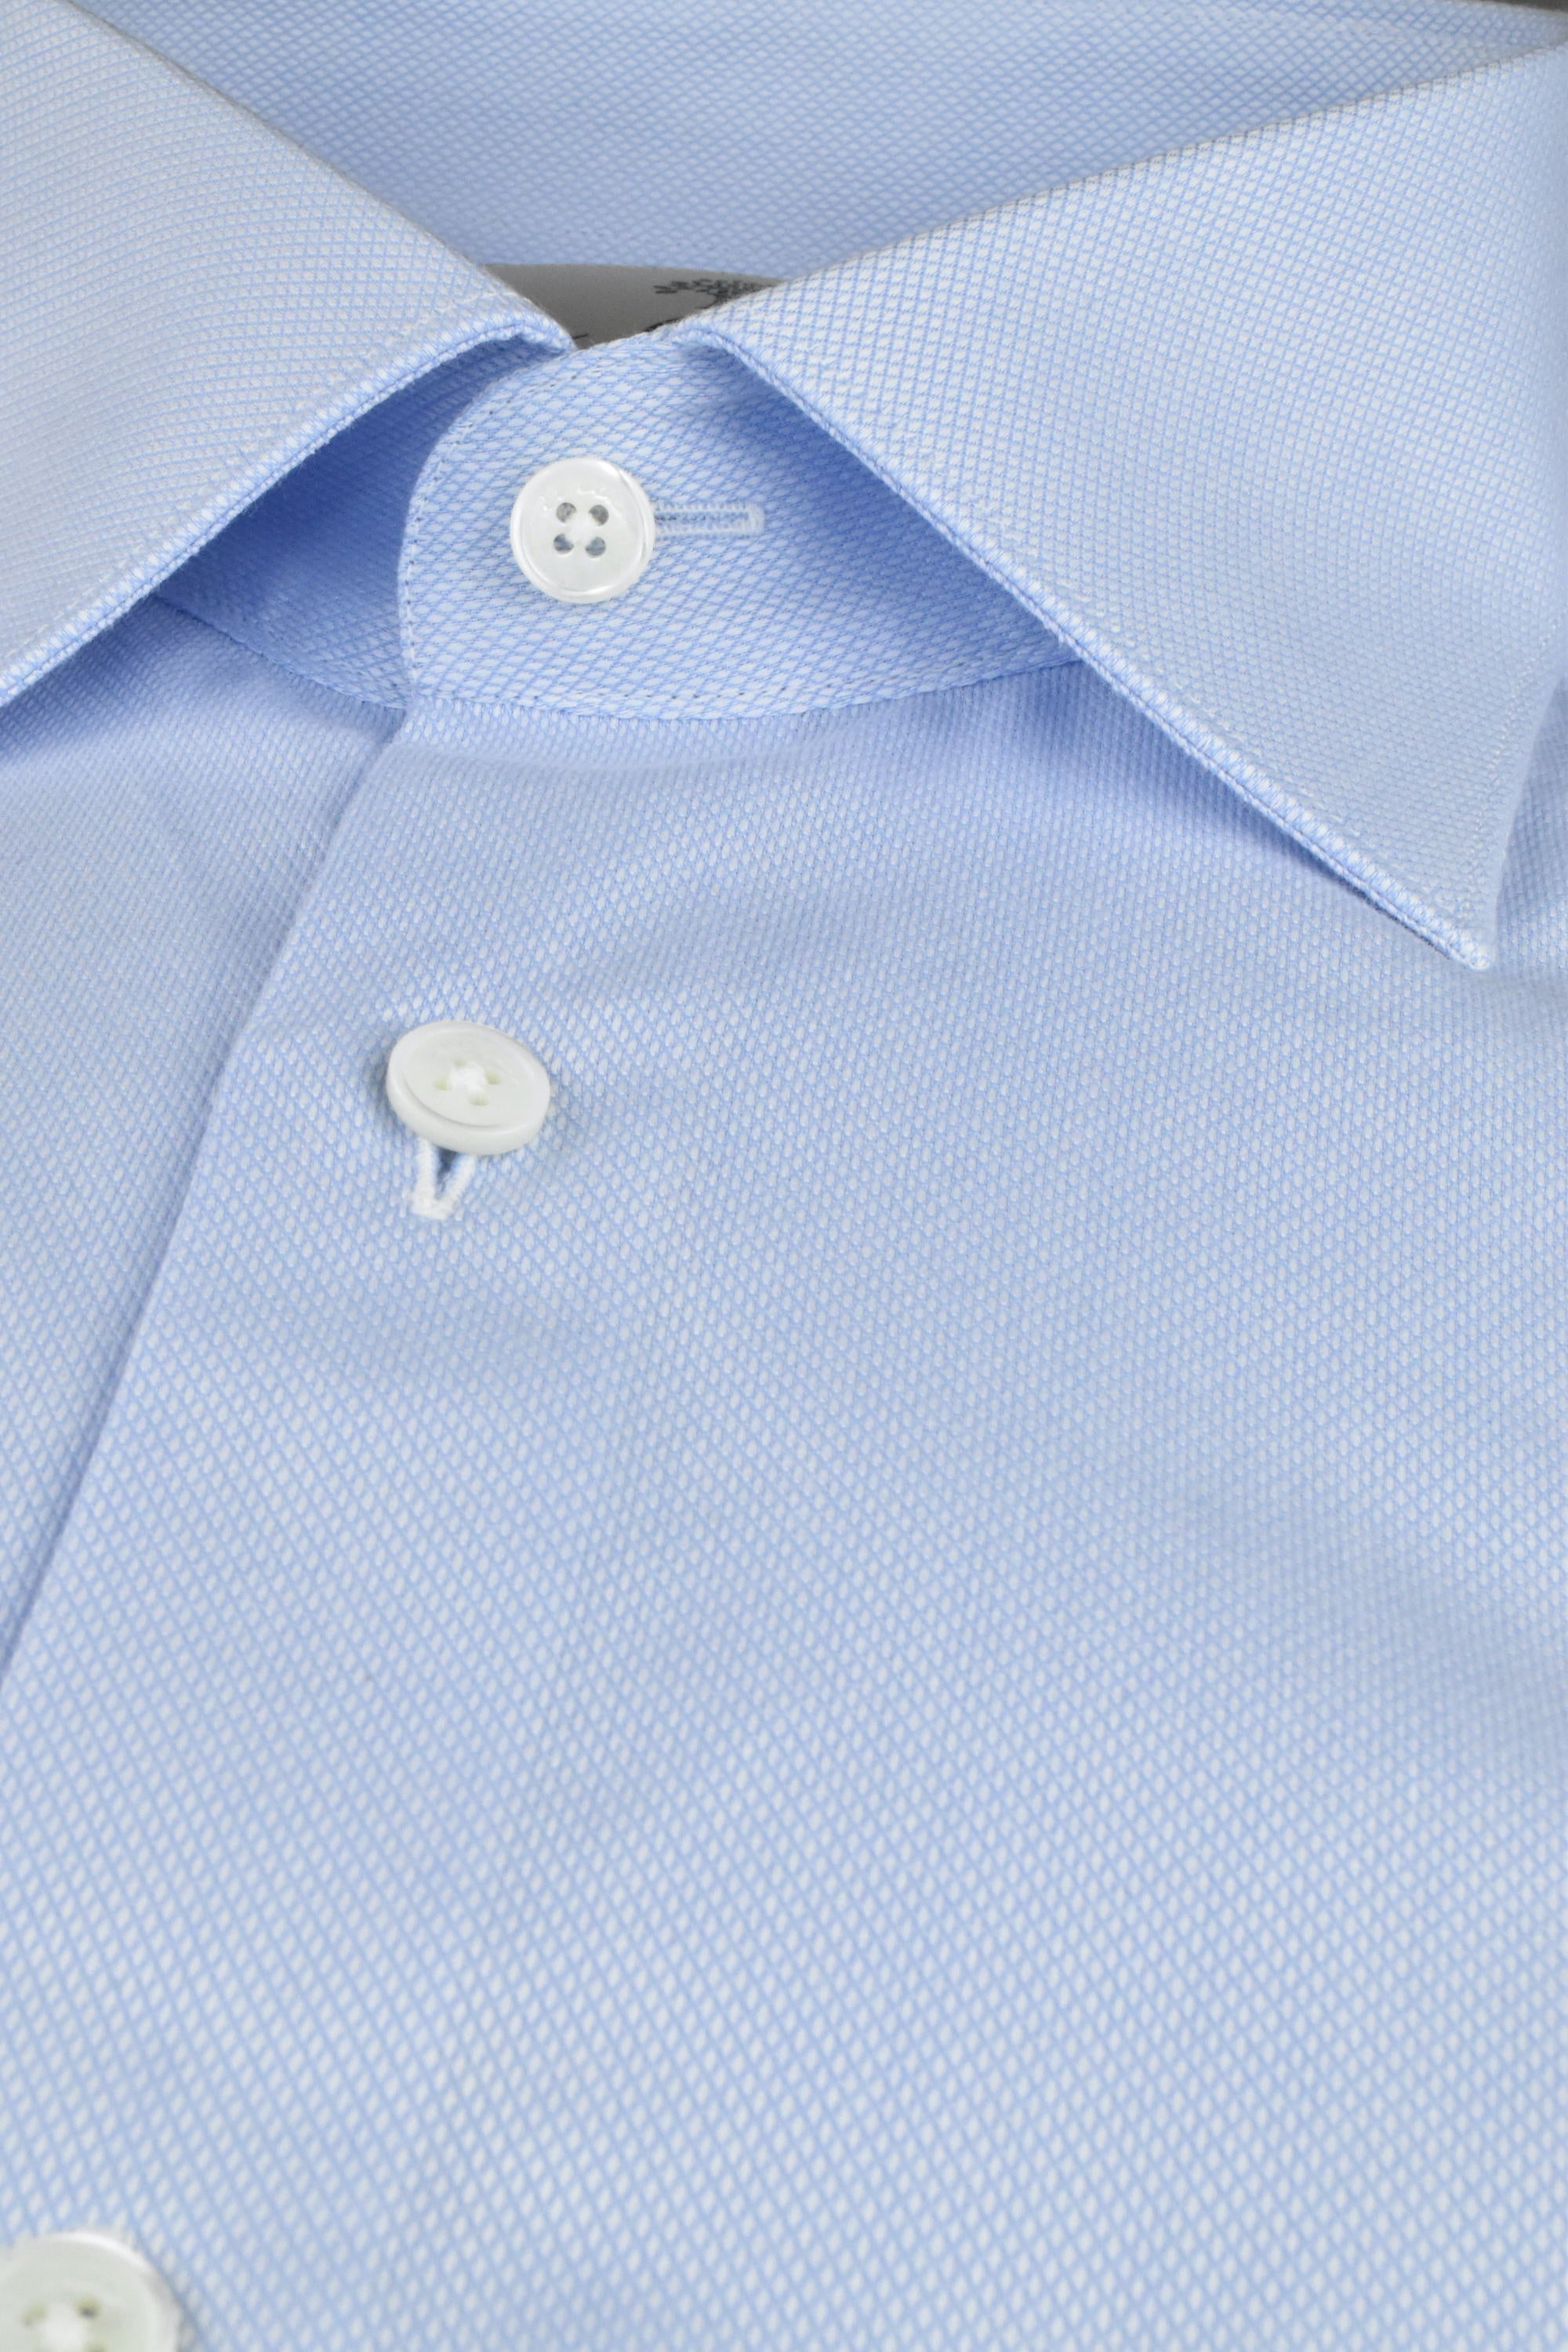 Light blue shirt made of organic cotton with a classic shark collar and casual cut - Made to order